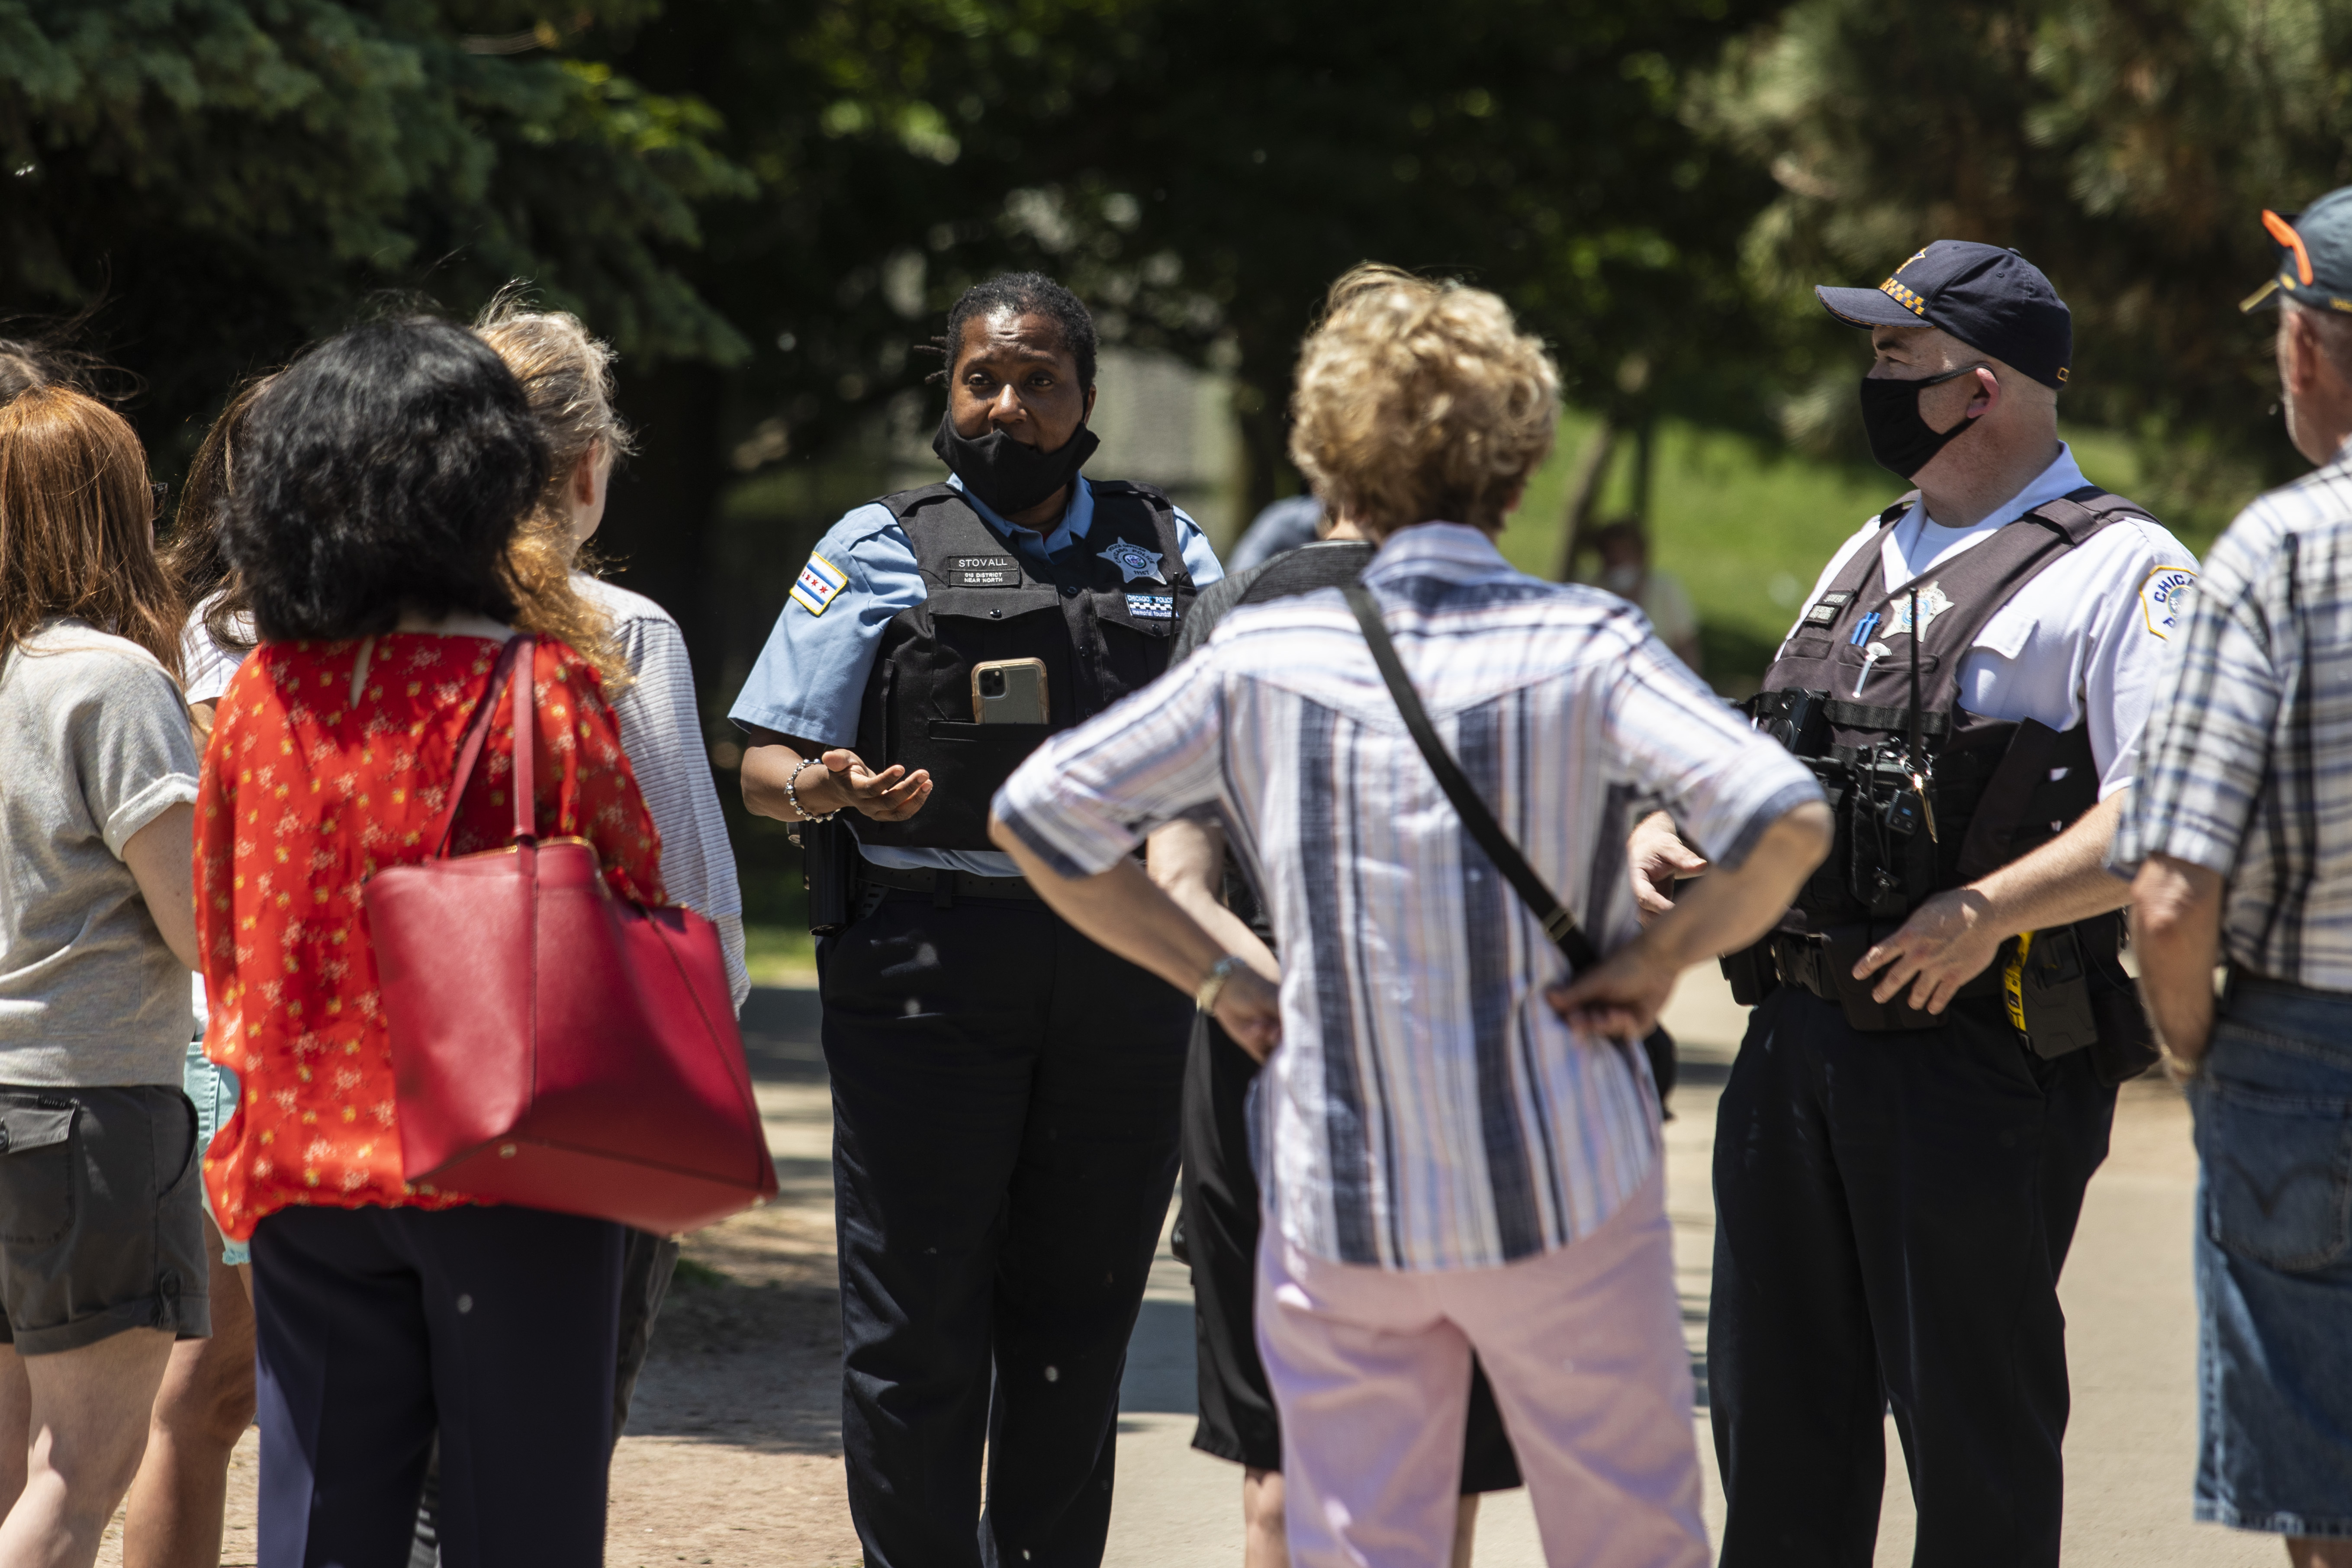 Chicago Police Officer Ramona Stovall and Sgt. Christopher Schenk speak to residents during a community meeting Friday afternoon about public safety and policing near Oz Park in Lincoln Park on the North Side.